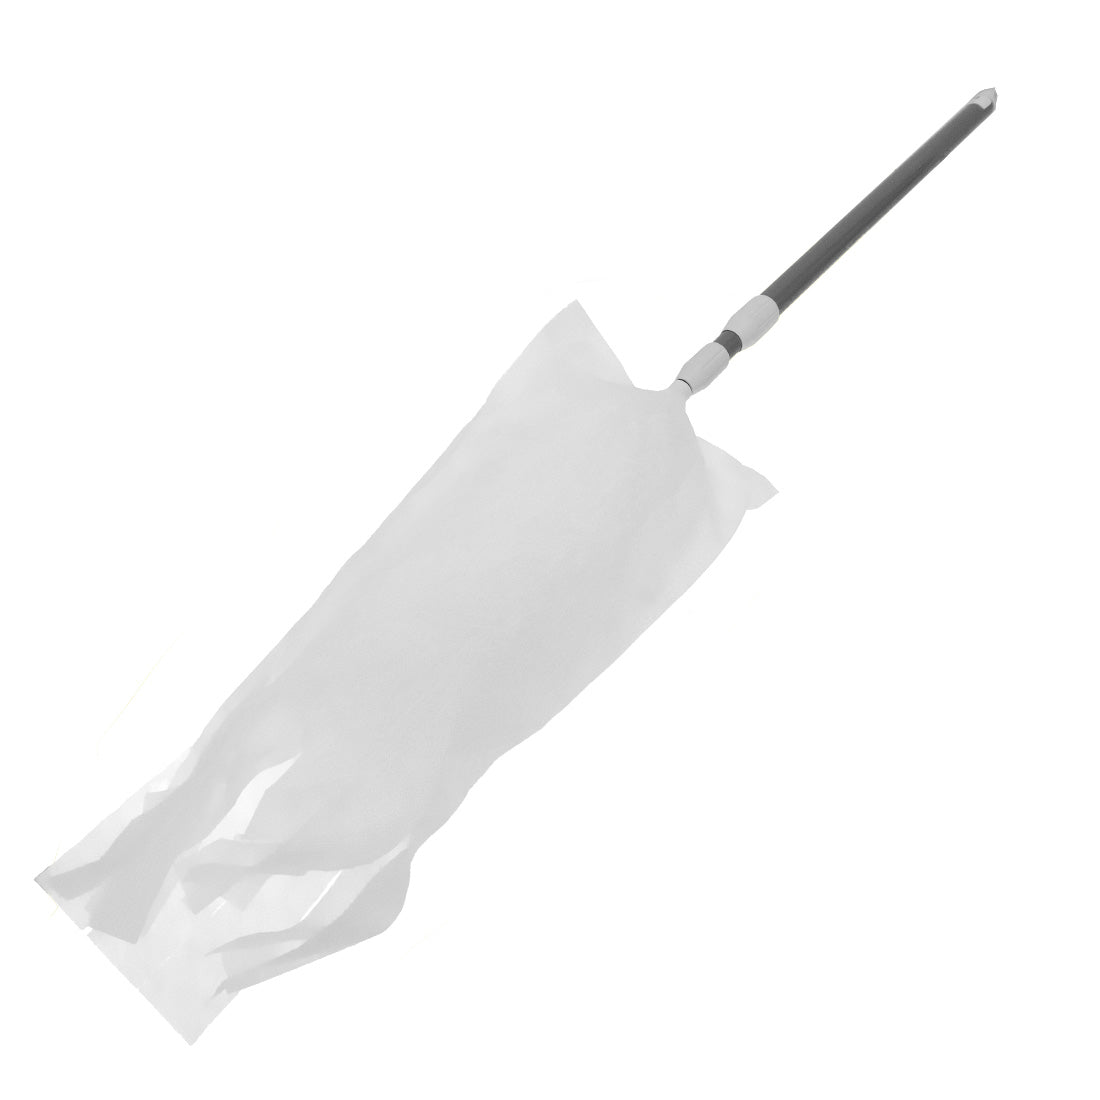 Unger StarDuster Pro Duster With Unger StarDuster Pro Duster Sleeve Upside Down Left Oblique View